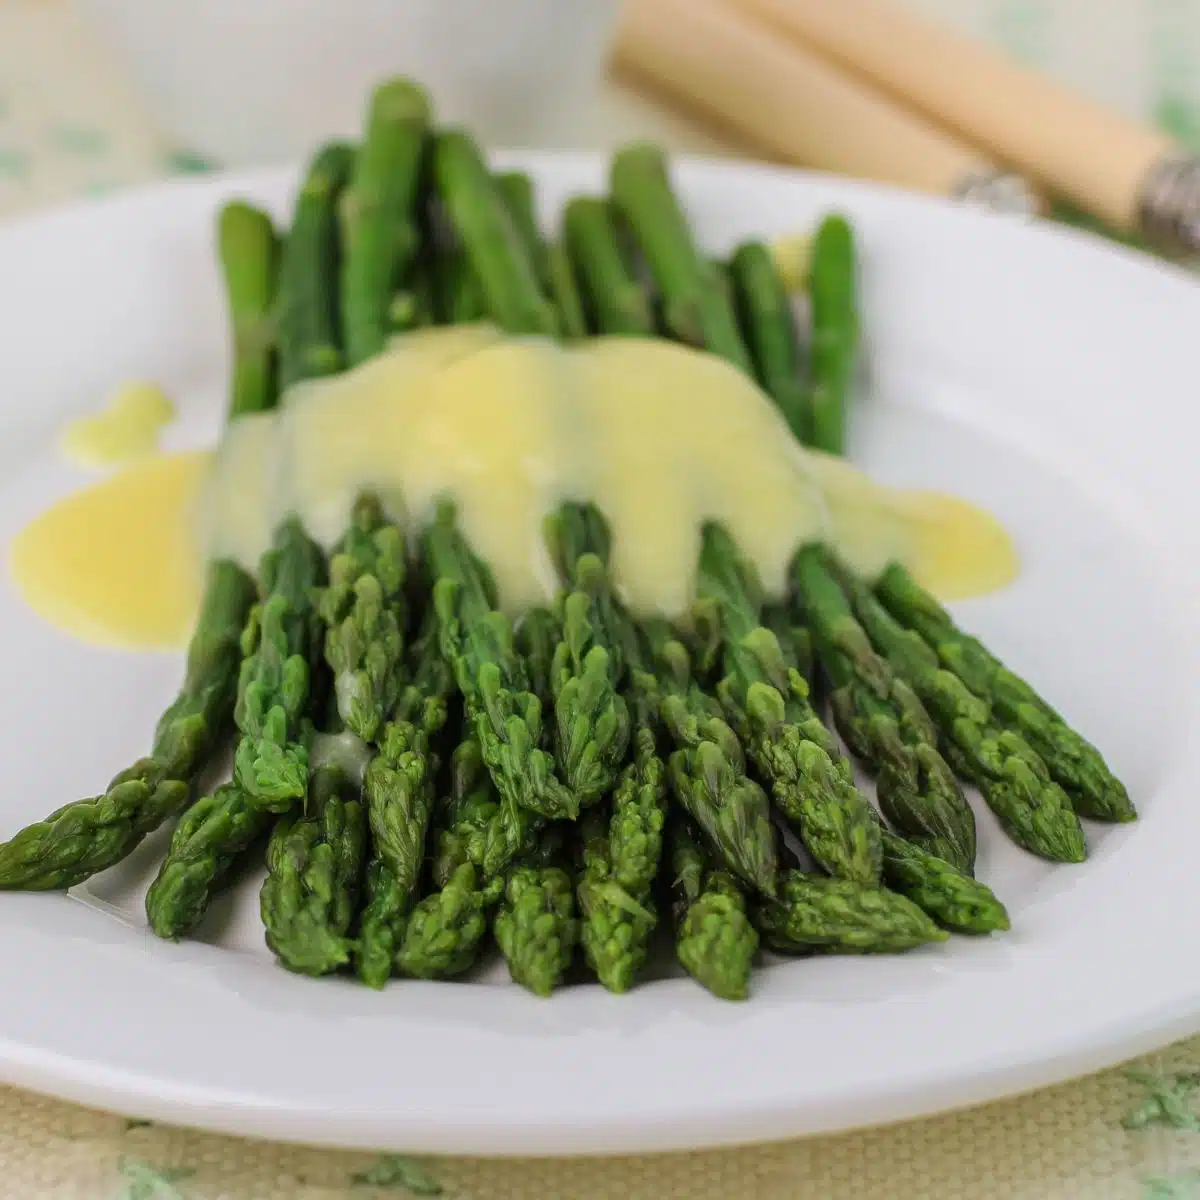 Square image showing mousseline sauce over asparagus.